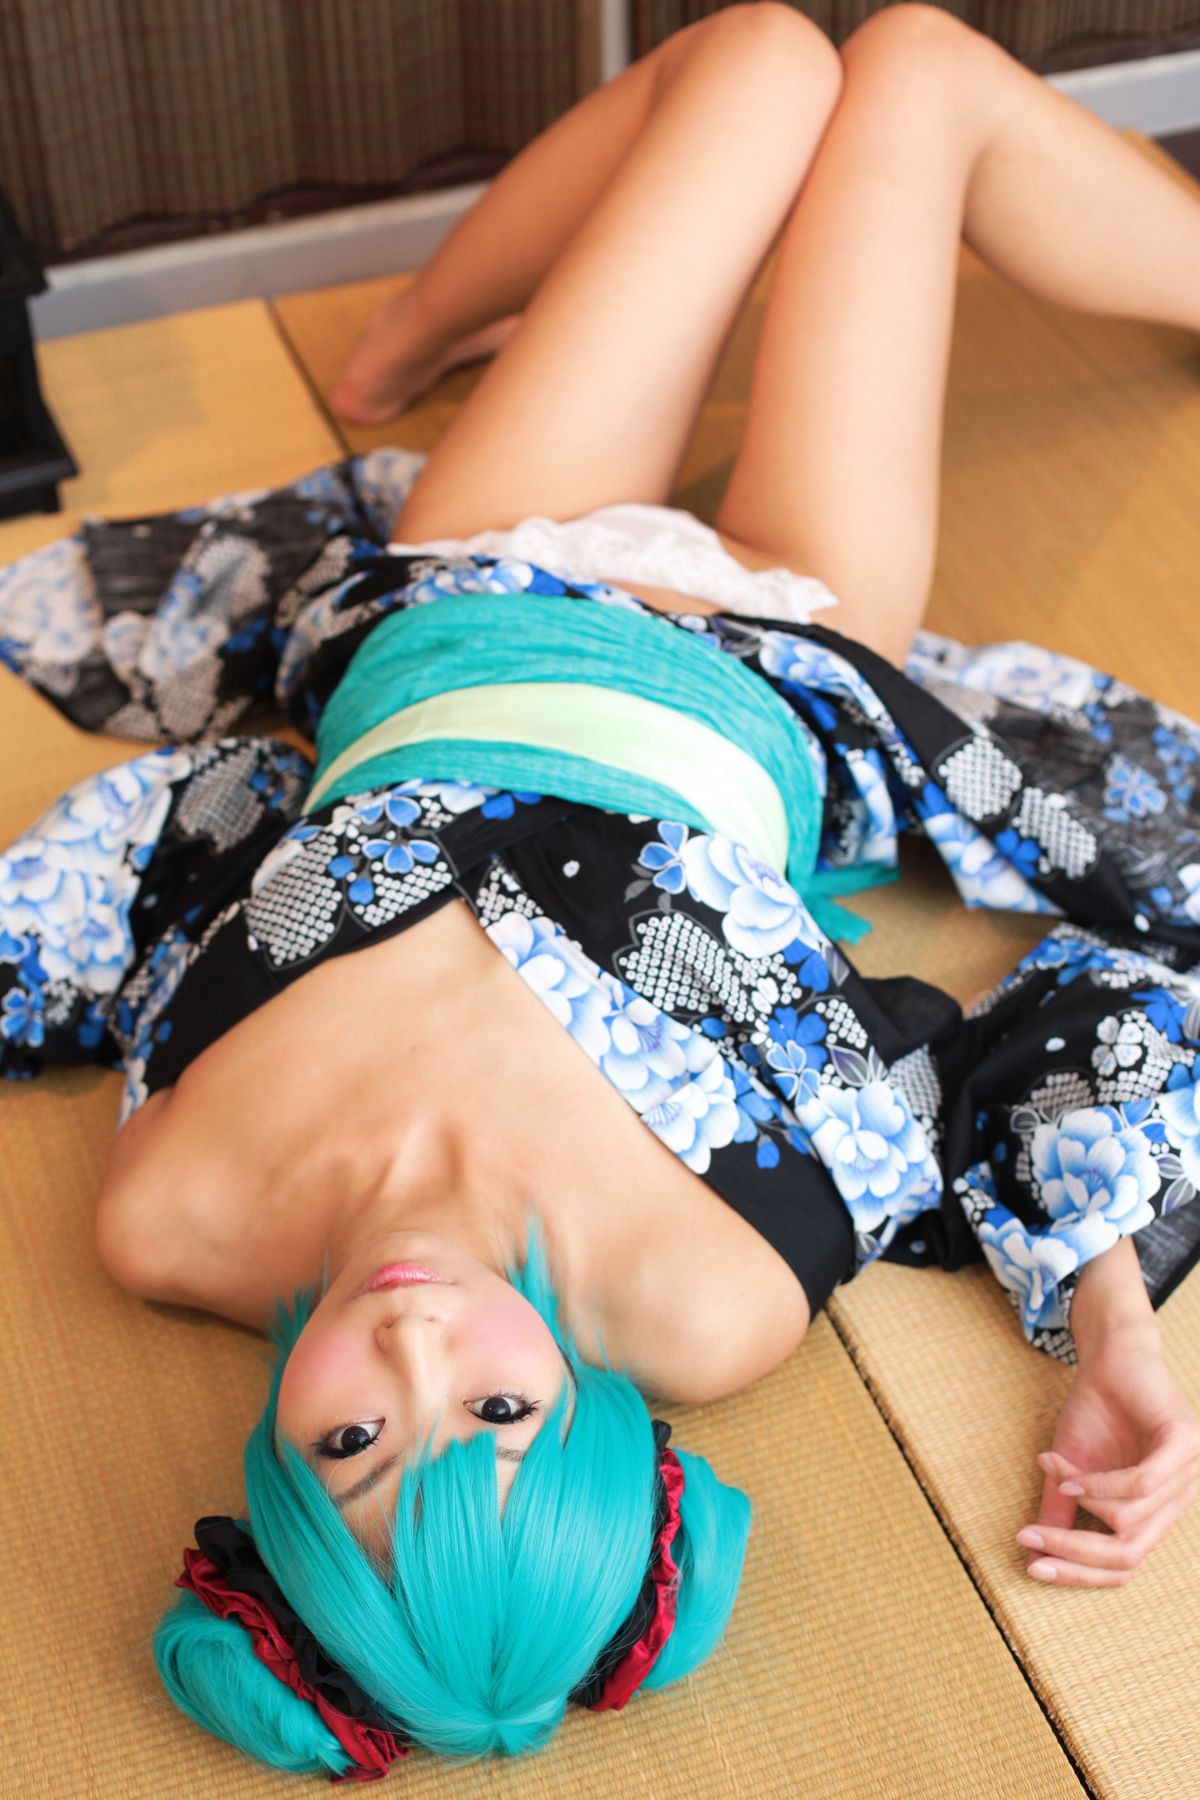 taotuhome[Cosplay] Necoco as Hatsune Miku from Vocaloid 套图第108张